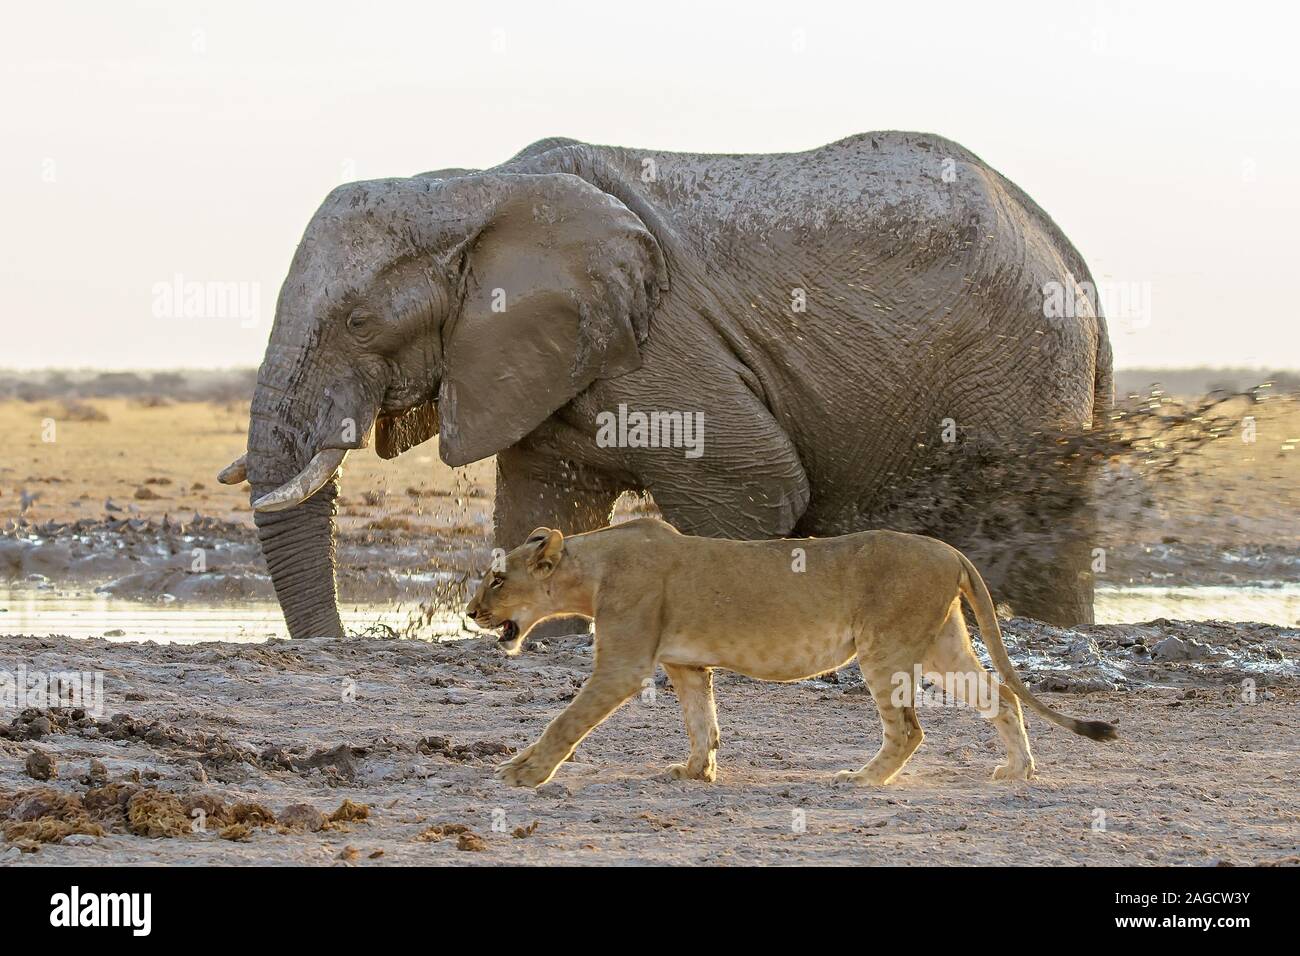 Greasy African elephant in the dirt friendly walking with an African lion Stock Photo